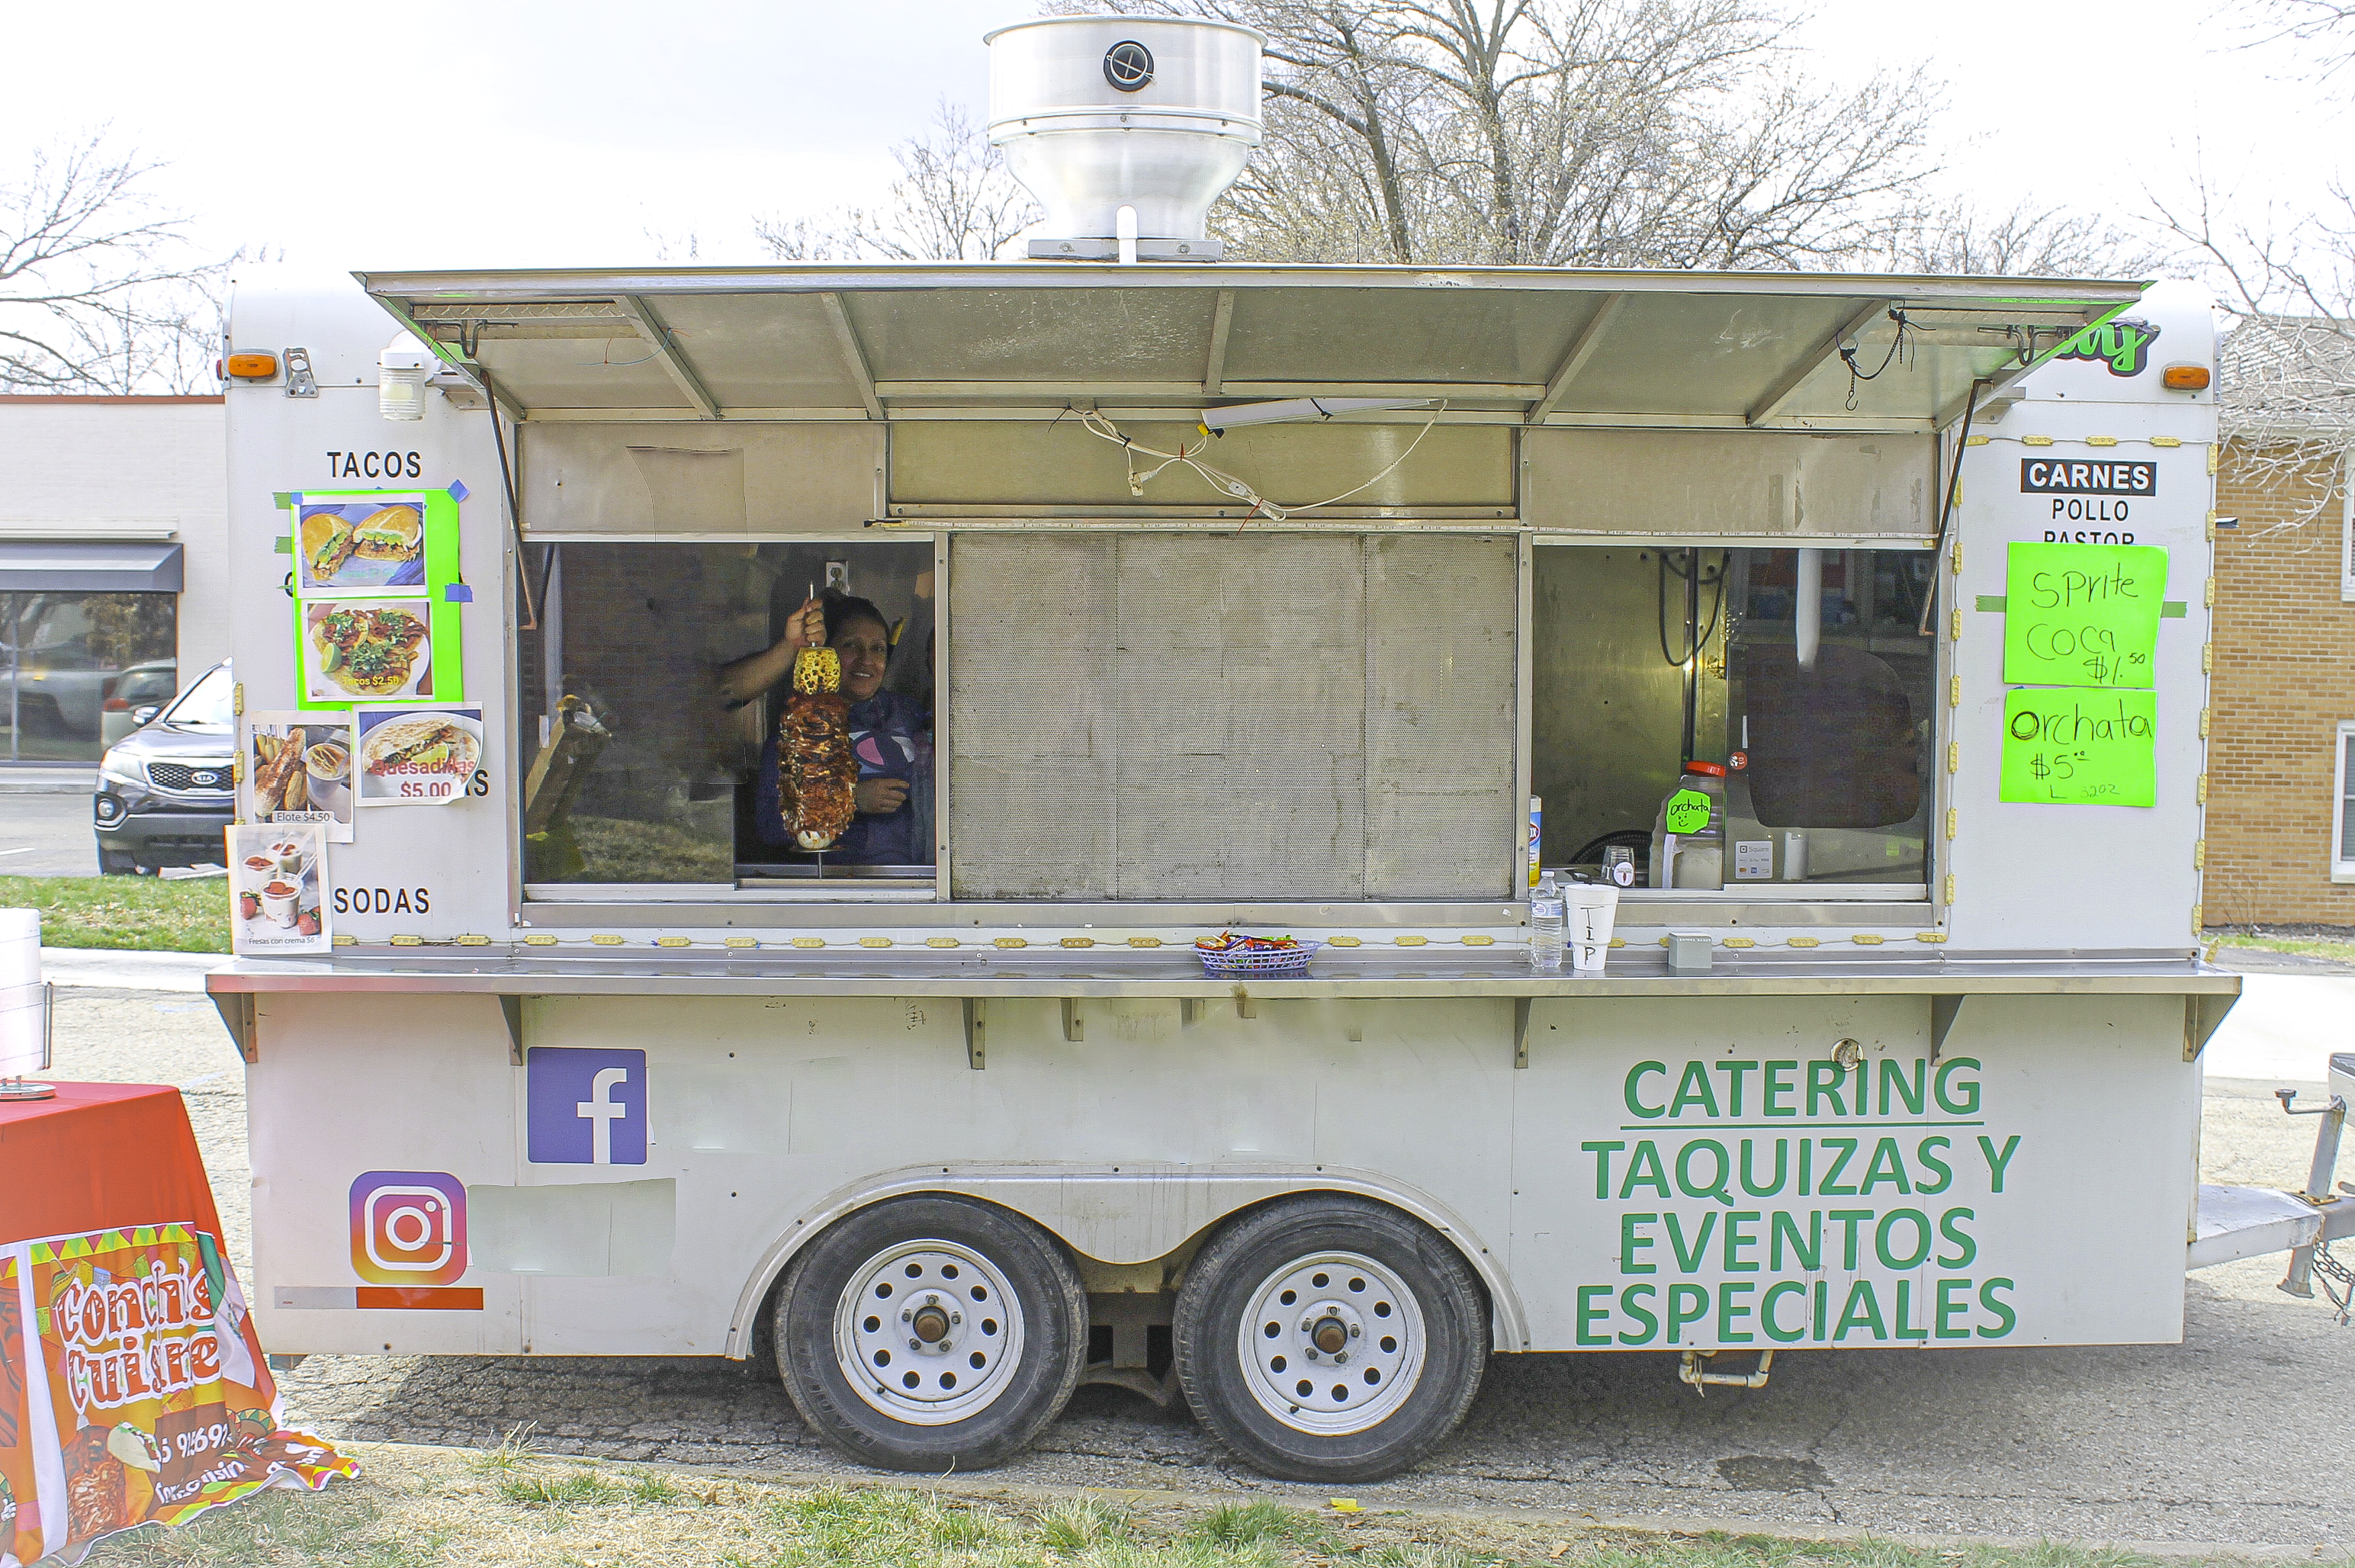 Consepcion set up in her food truck with her trompo and all of her food items